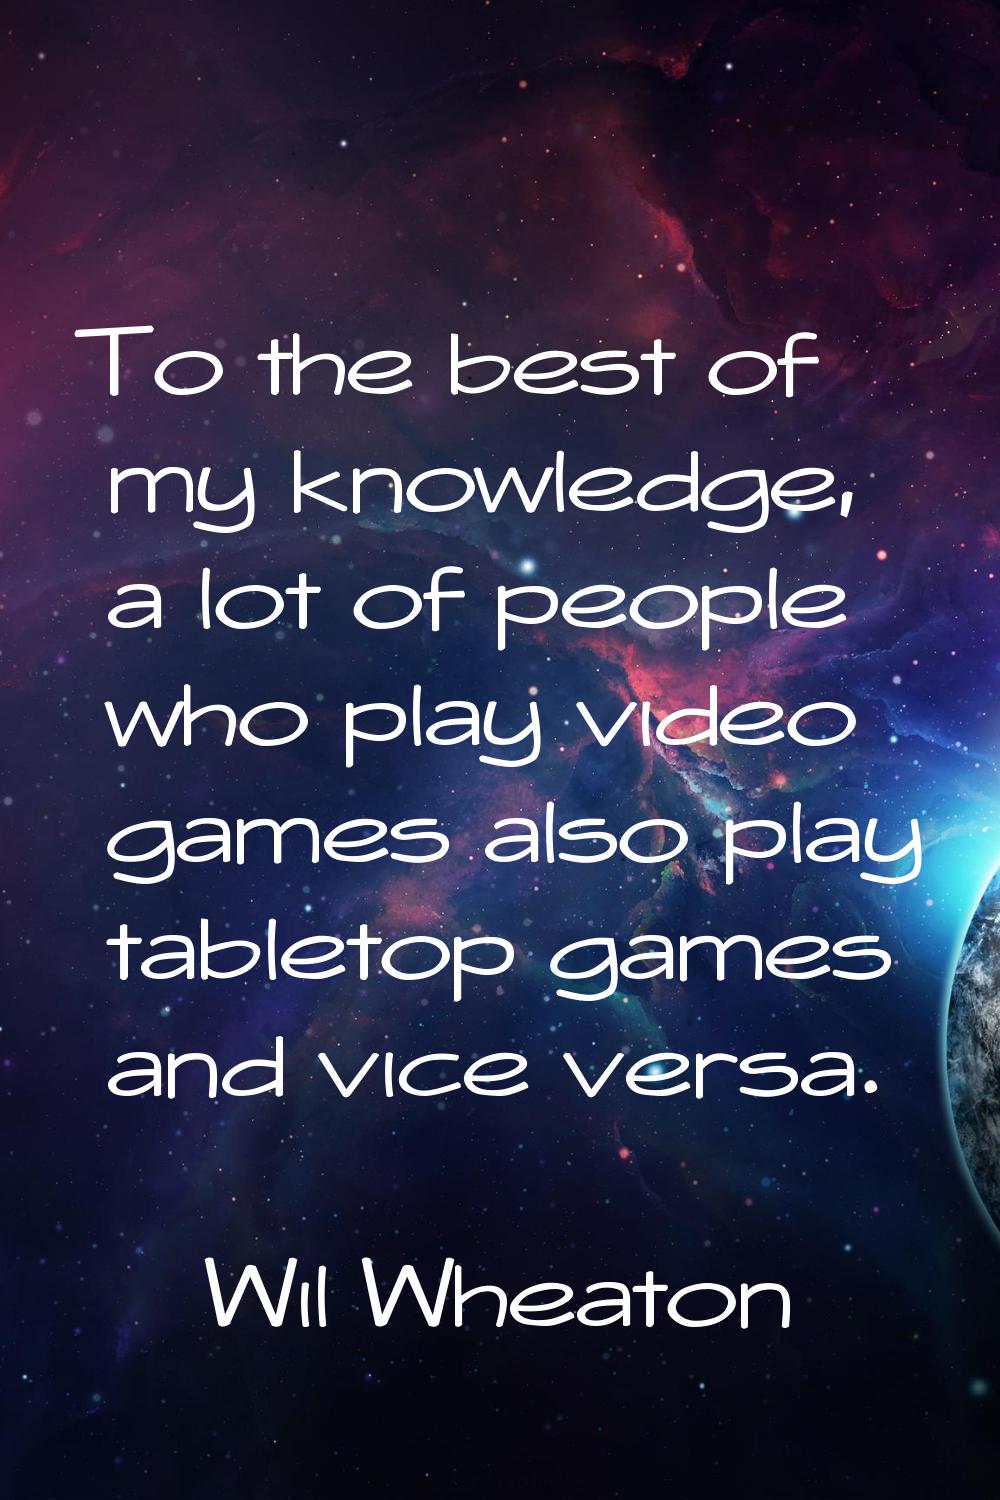 To the best of my knowledge, a lot of people who play video games also play tabletop games and vice